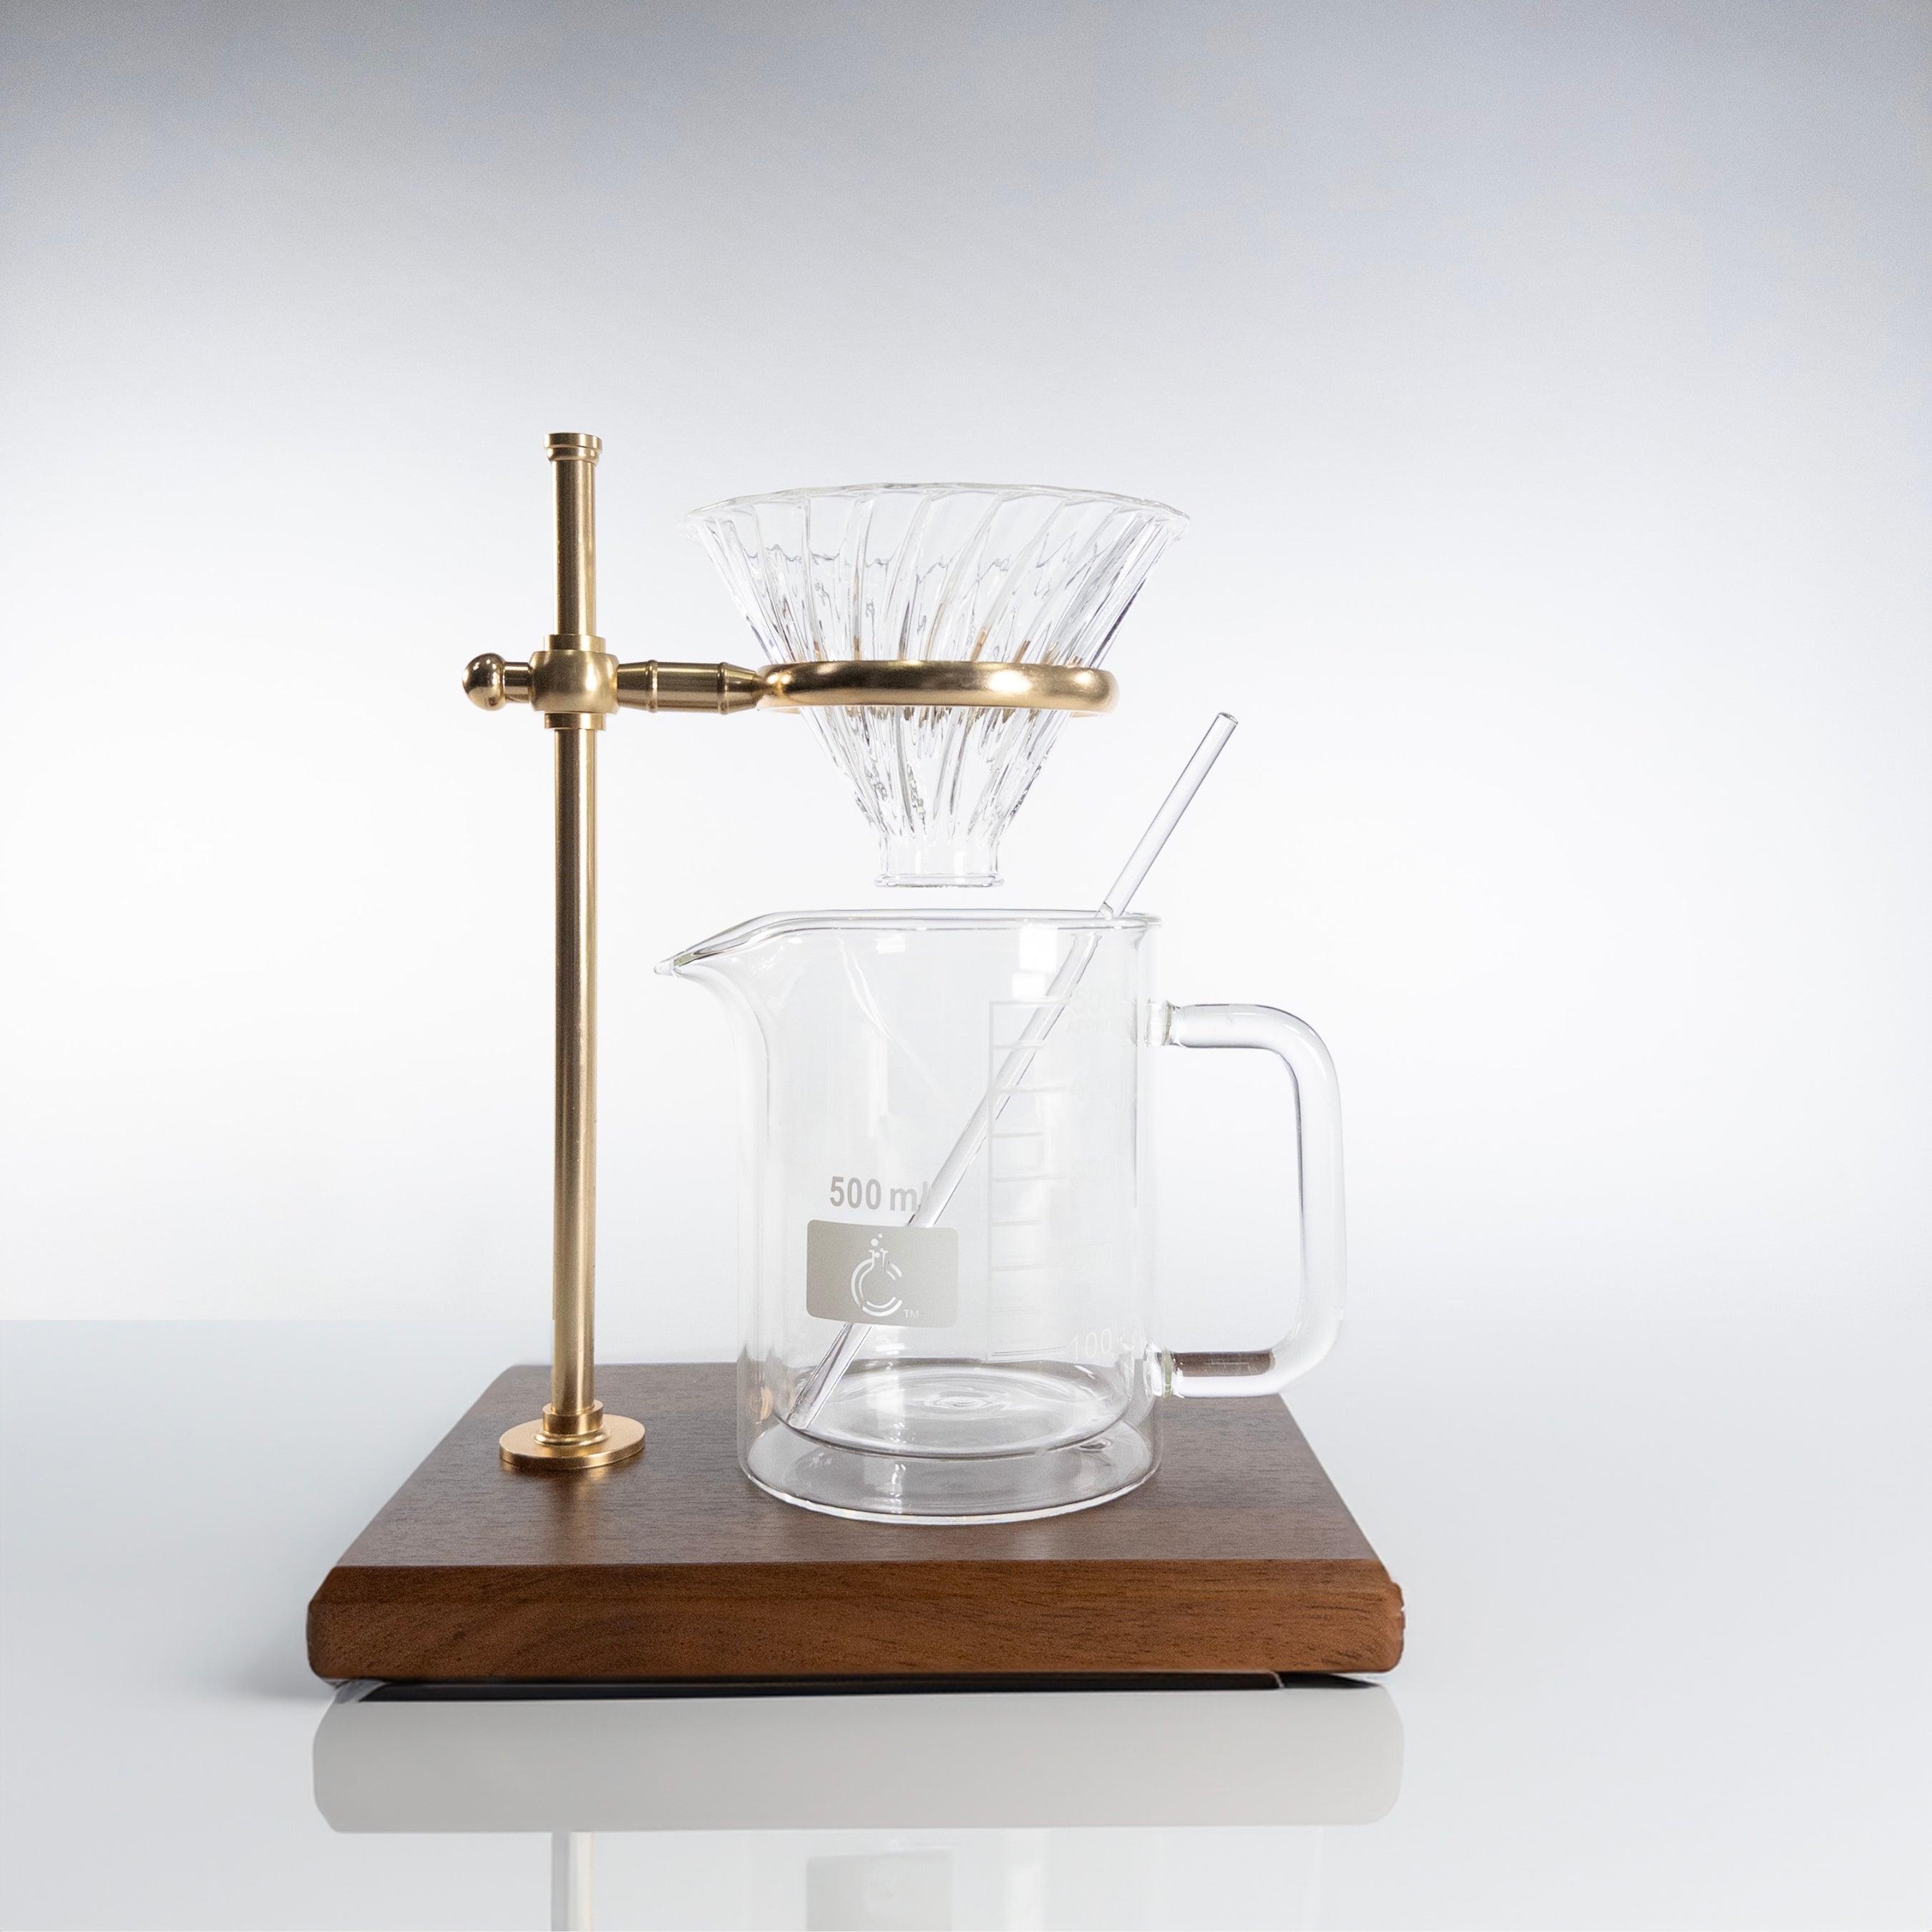 Pour-Over Coffee Maker Set with Chemistry Beaker Mug | Science Gift for Teachers and Students - thecalculatedchemist